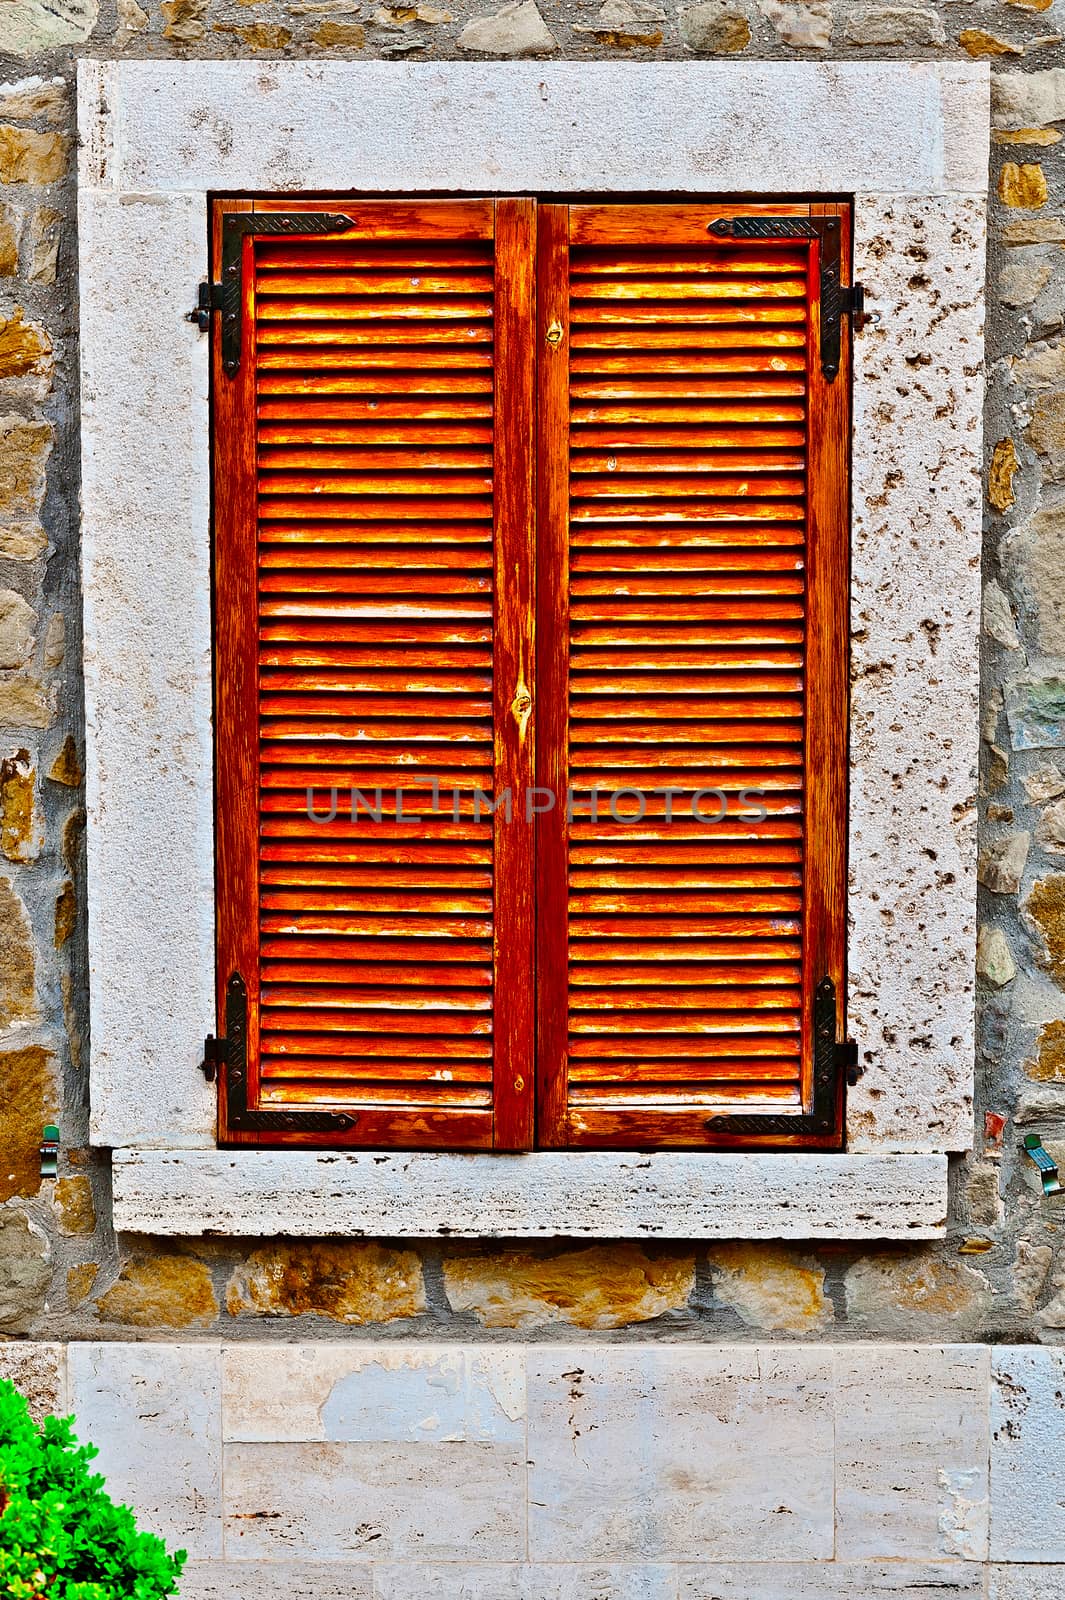 Closed Window of Old Building in Italy